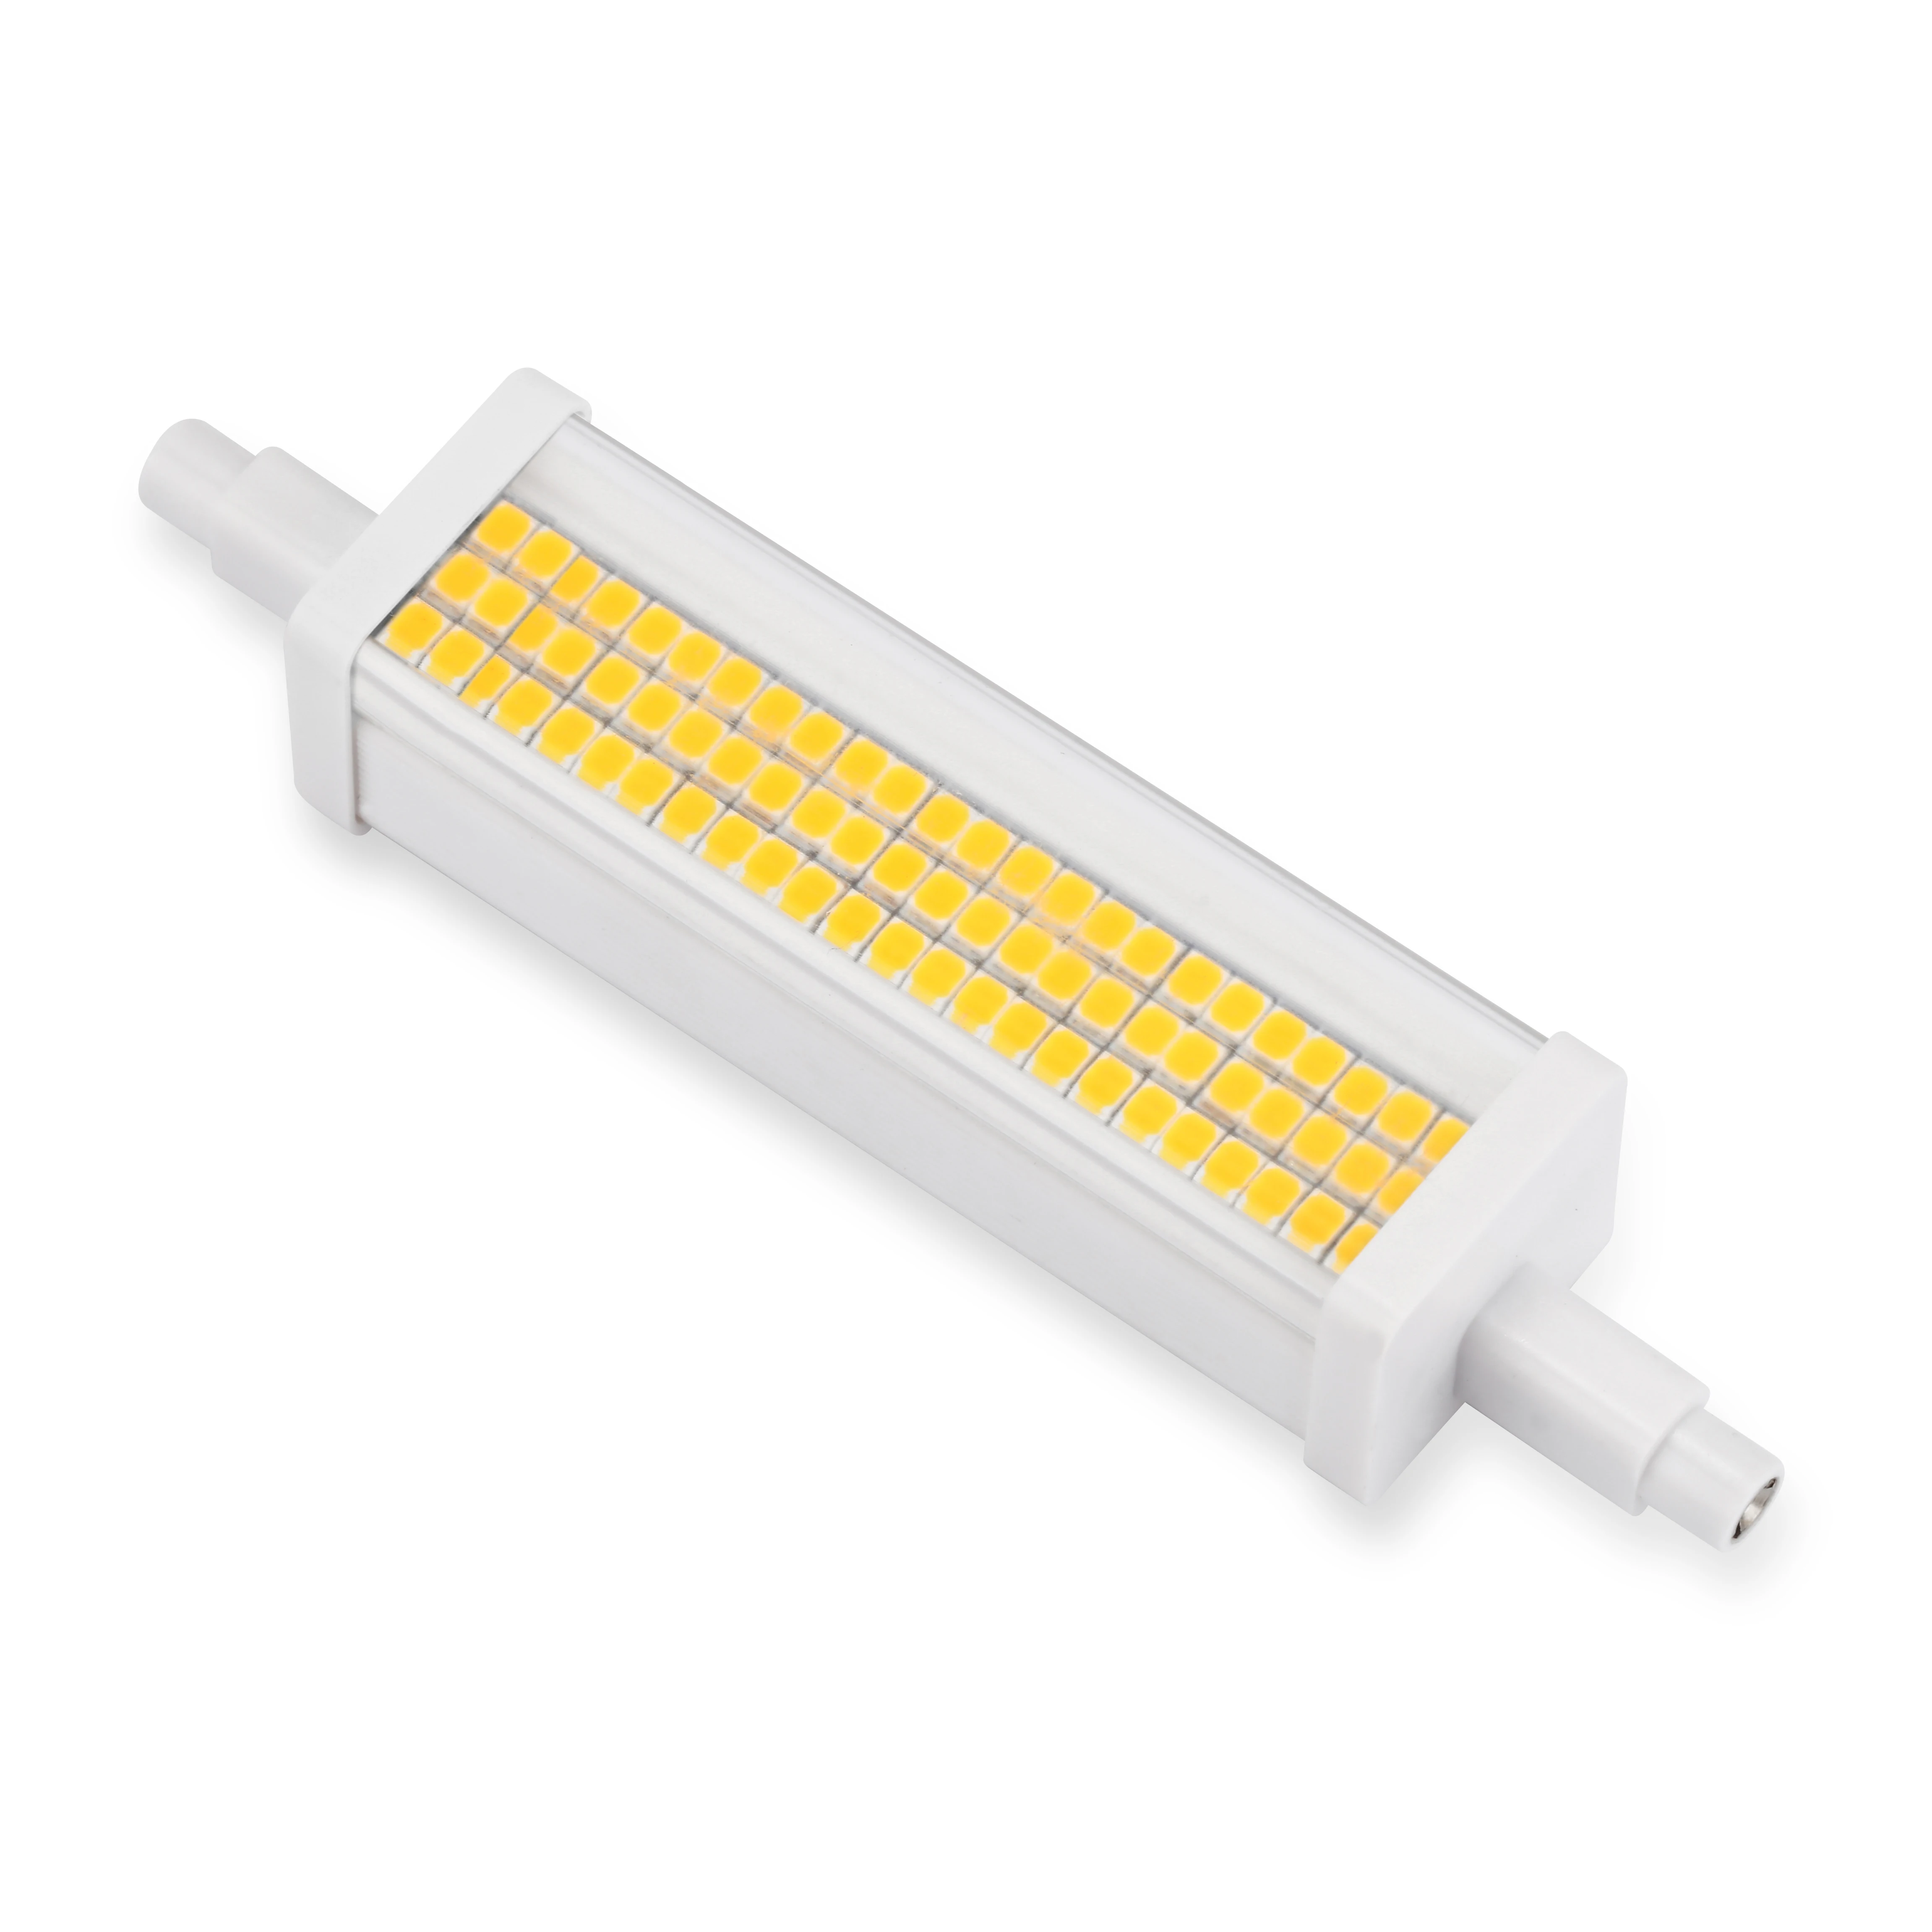 New Ceramic 10W R7S led 118mm dimmable 120Degree LED Light Good Heat dissipation Hot sell